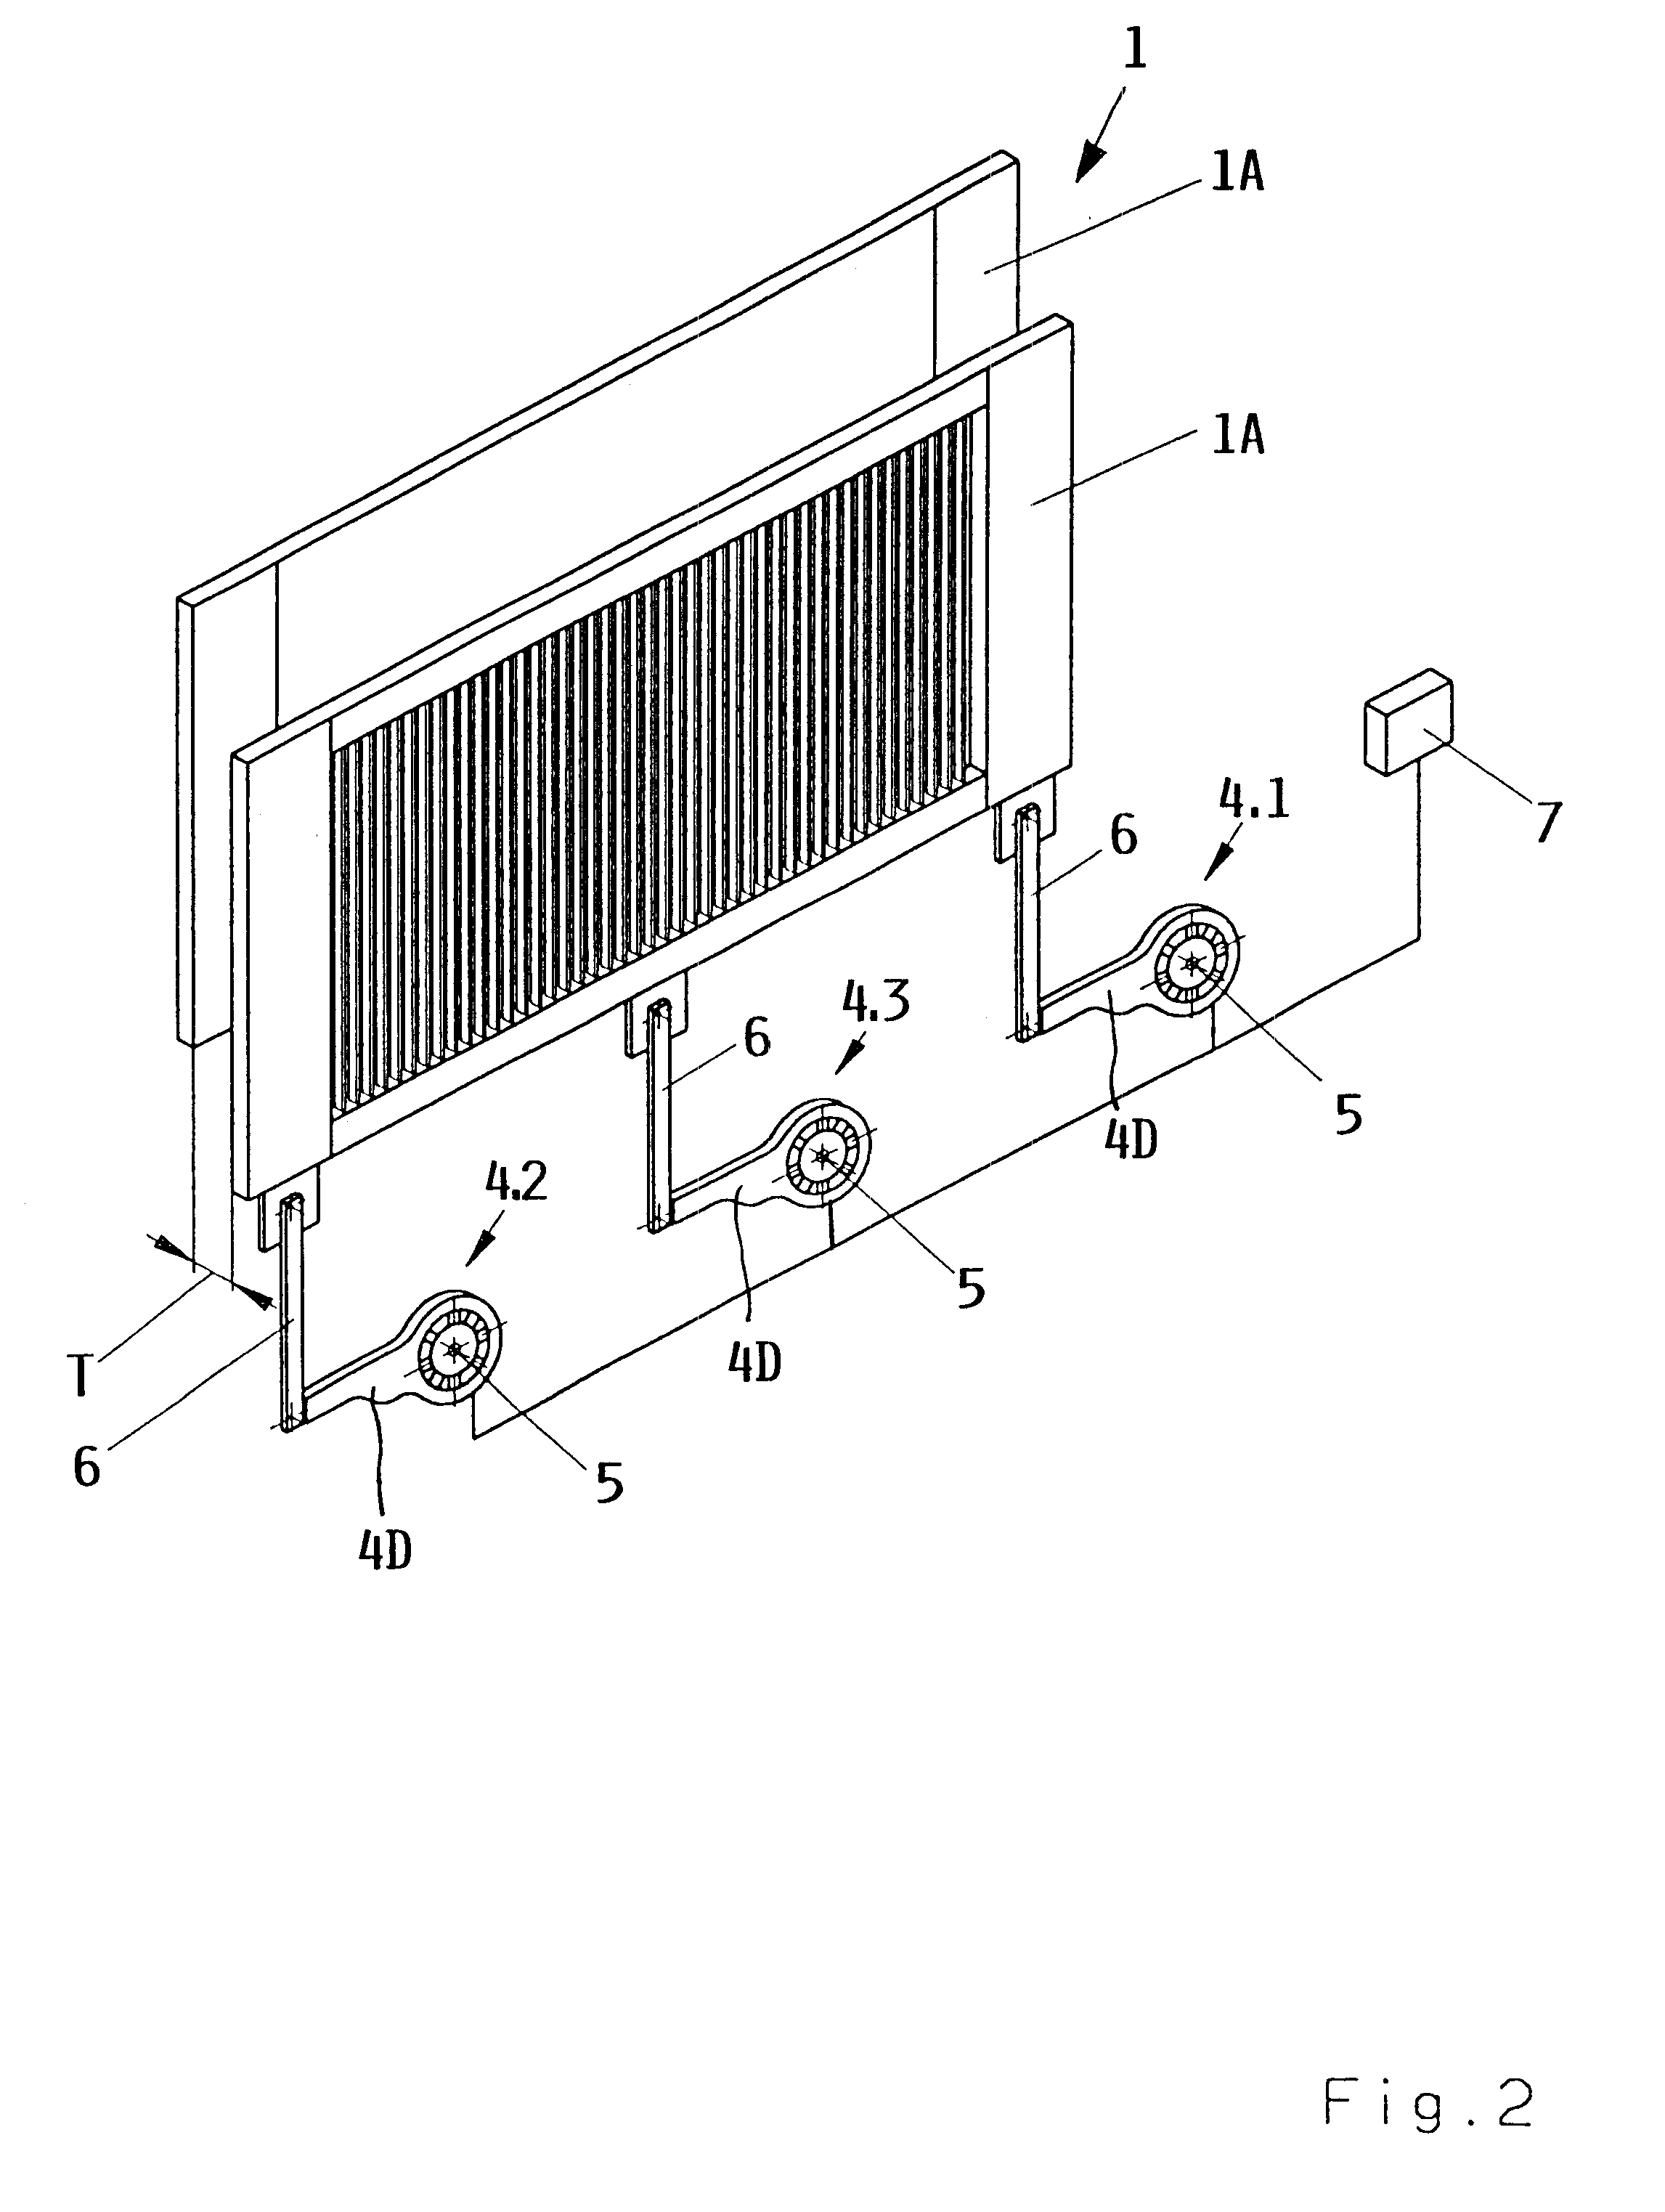 Electric motor drive mechanism for shed forming components of a loom